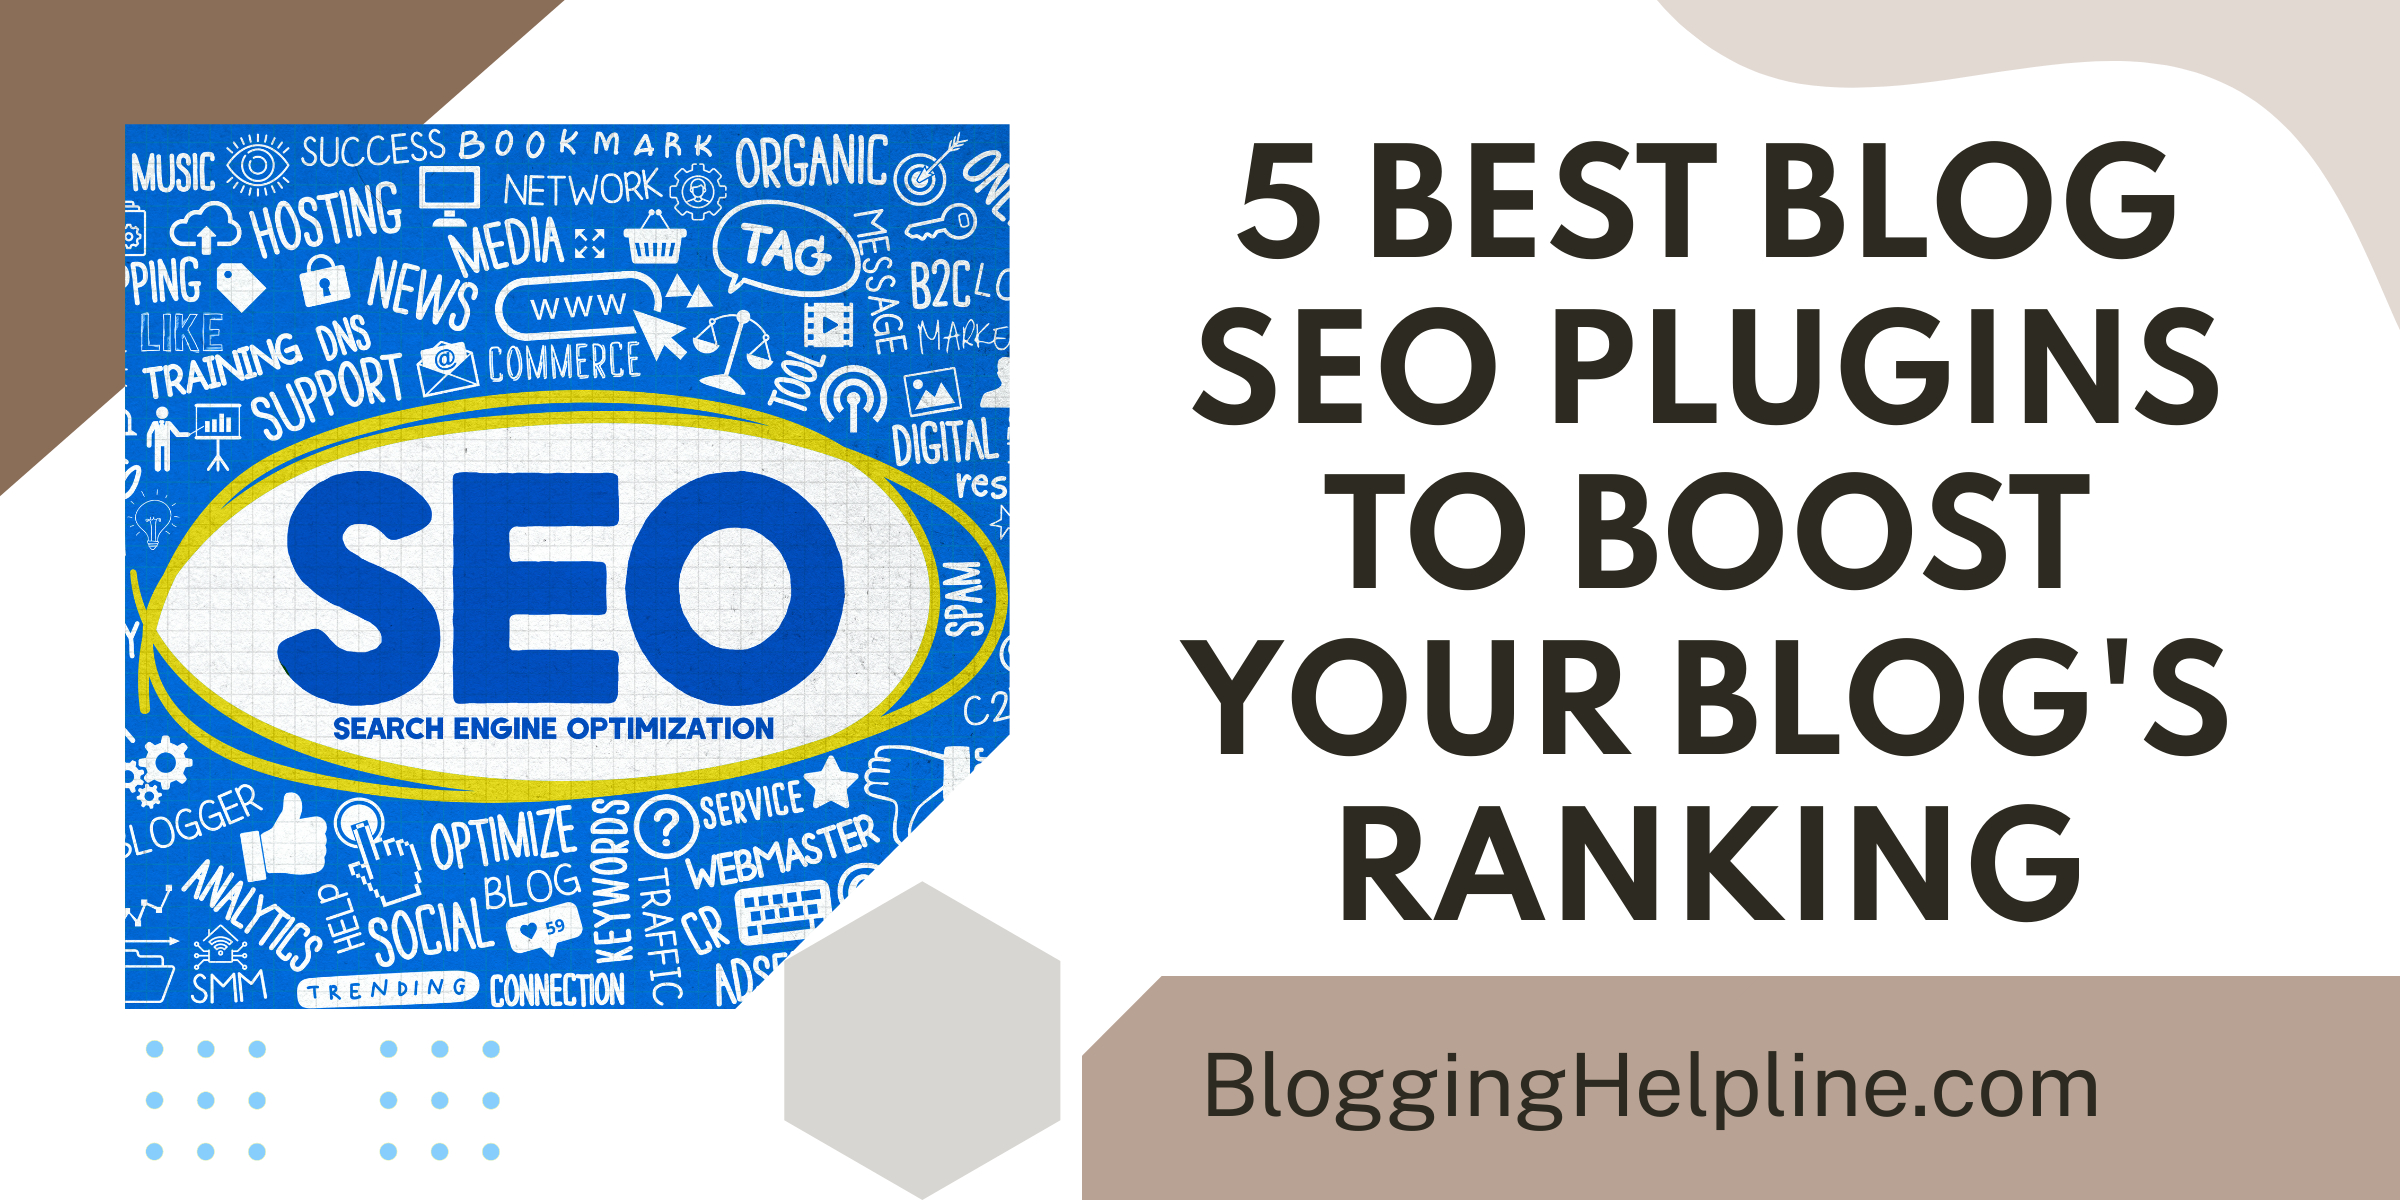 5 Best Blog SEO Plugins to Boost Your Blog's Ranking